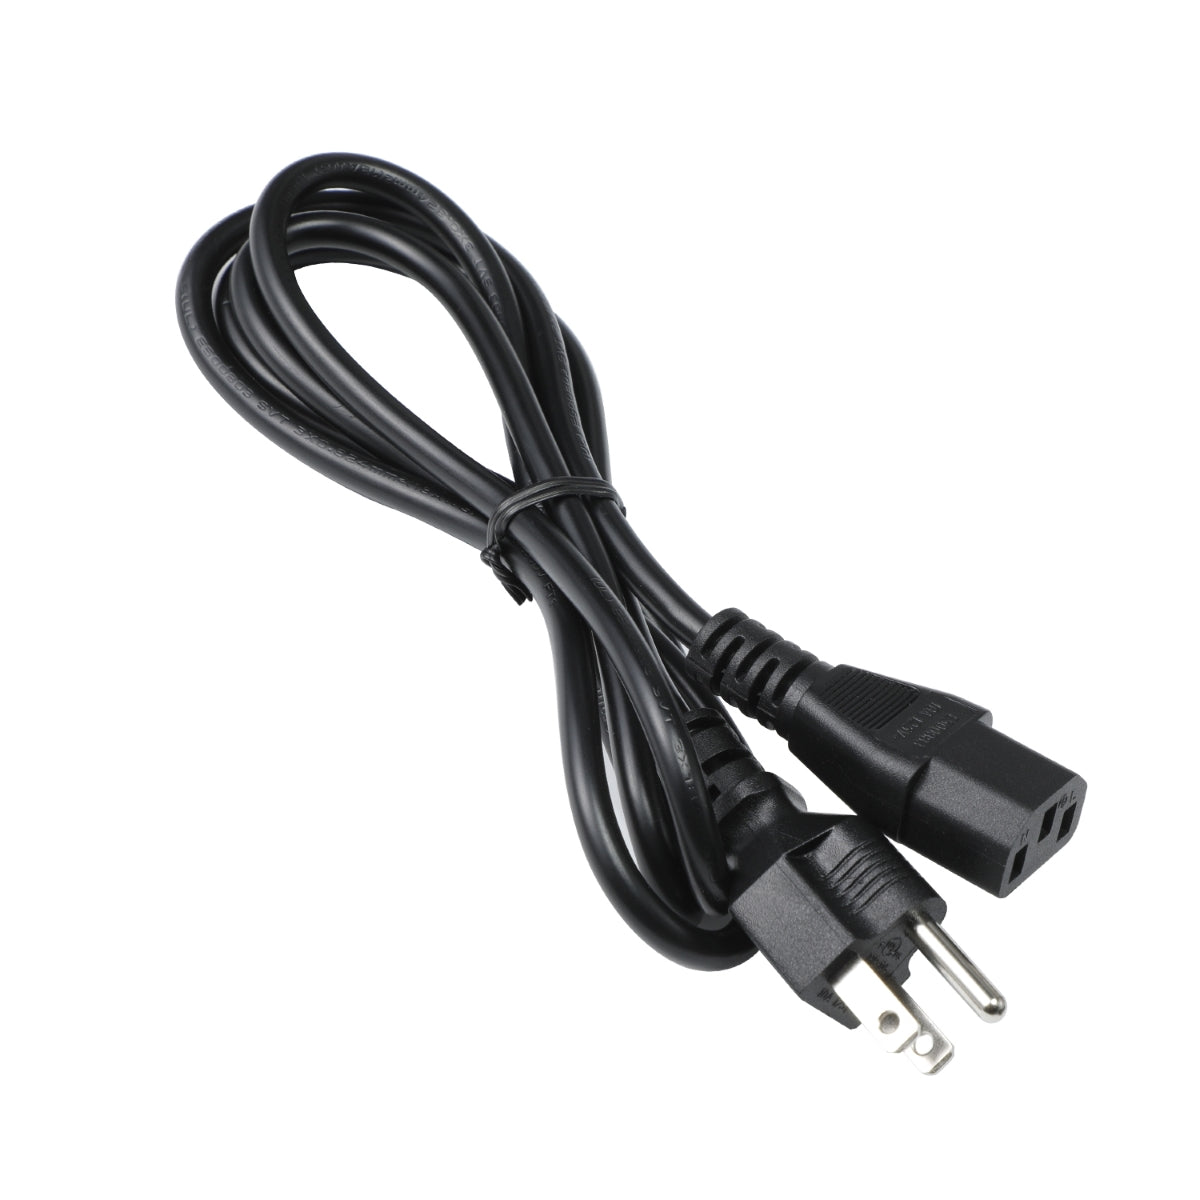 Power Cord for Dell Inspiron 5490 All-in-One Desktop.